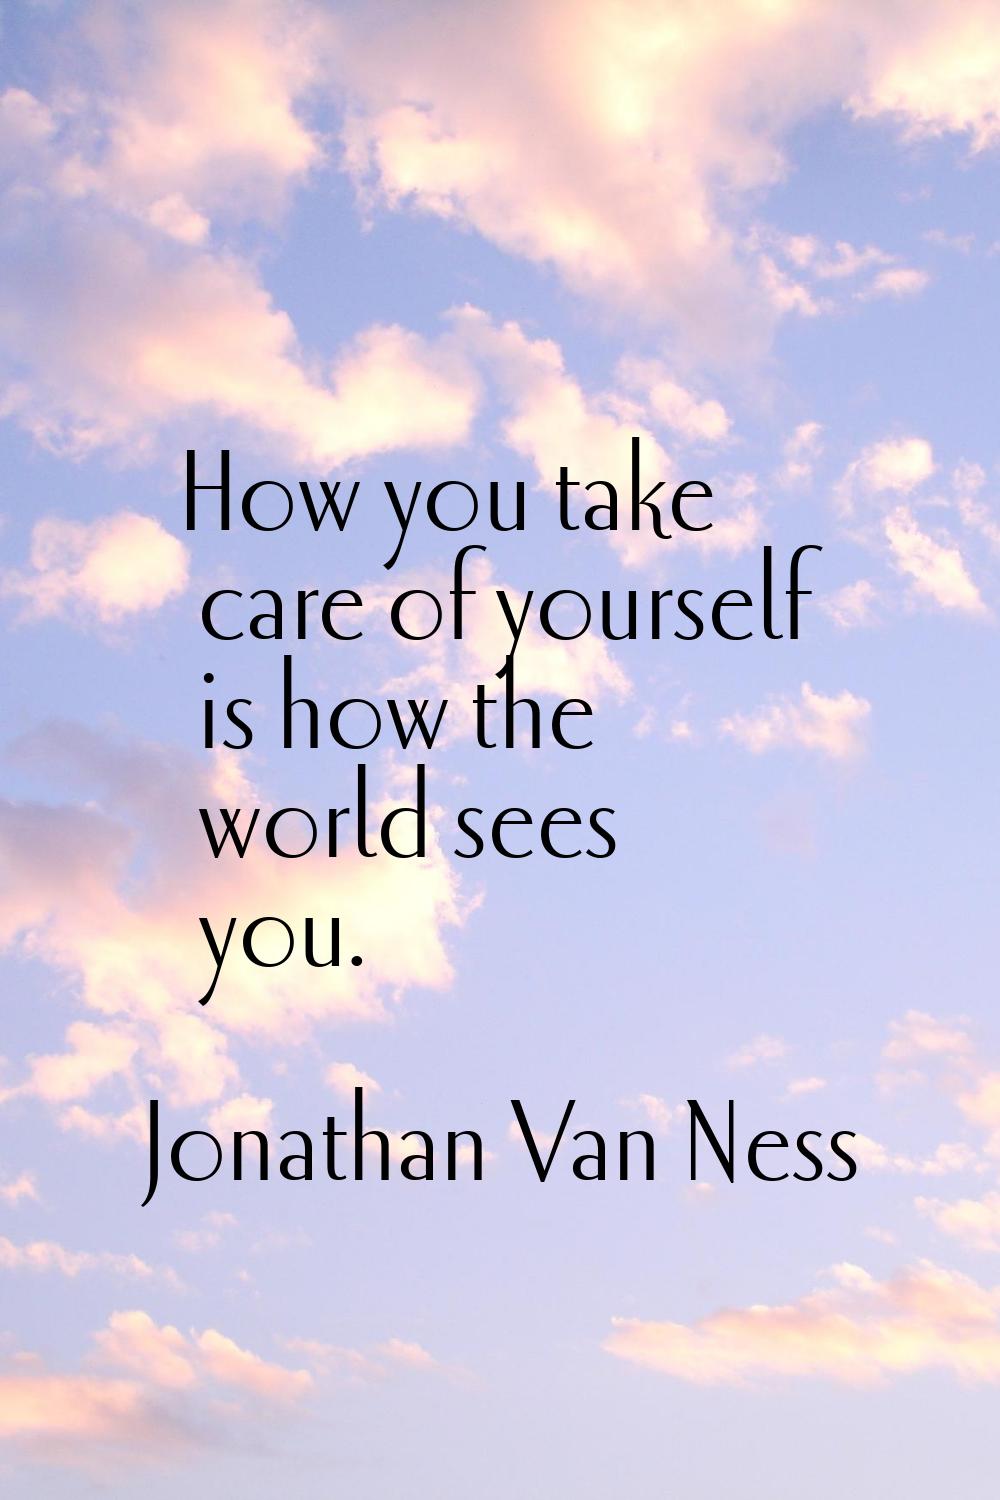 How you take care of yourself is how the world sees you.